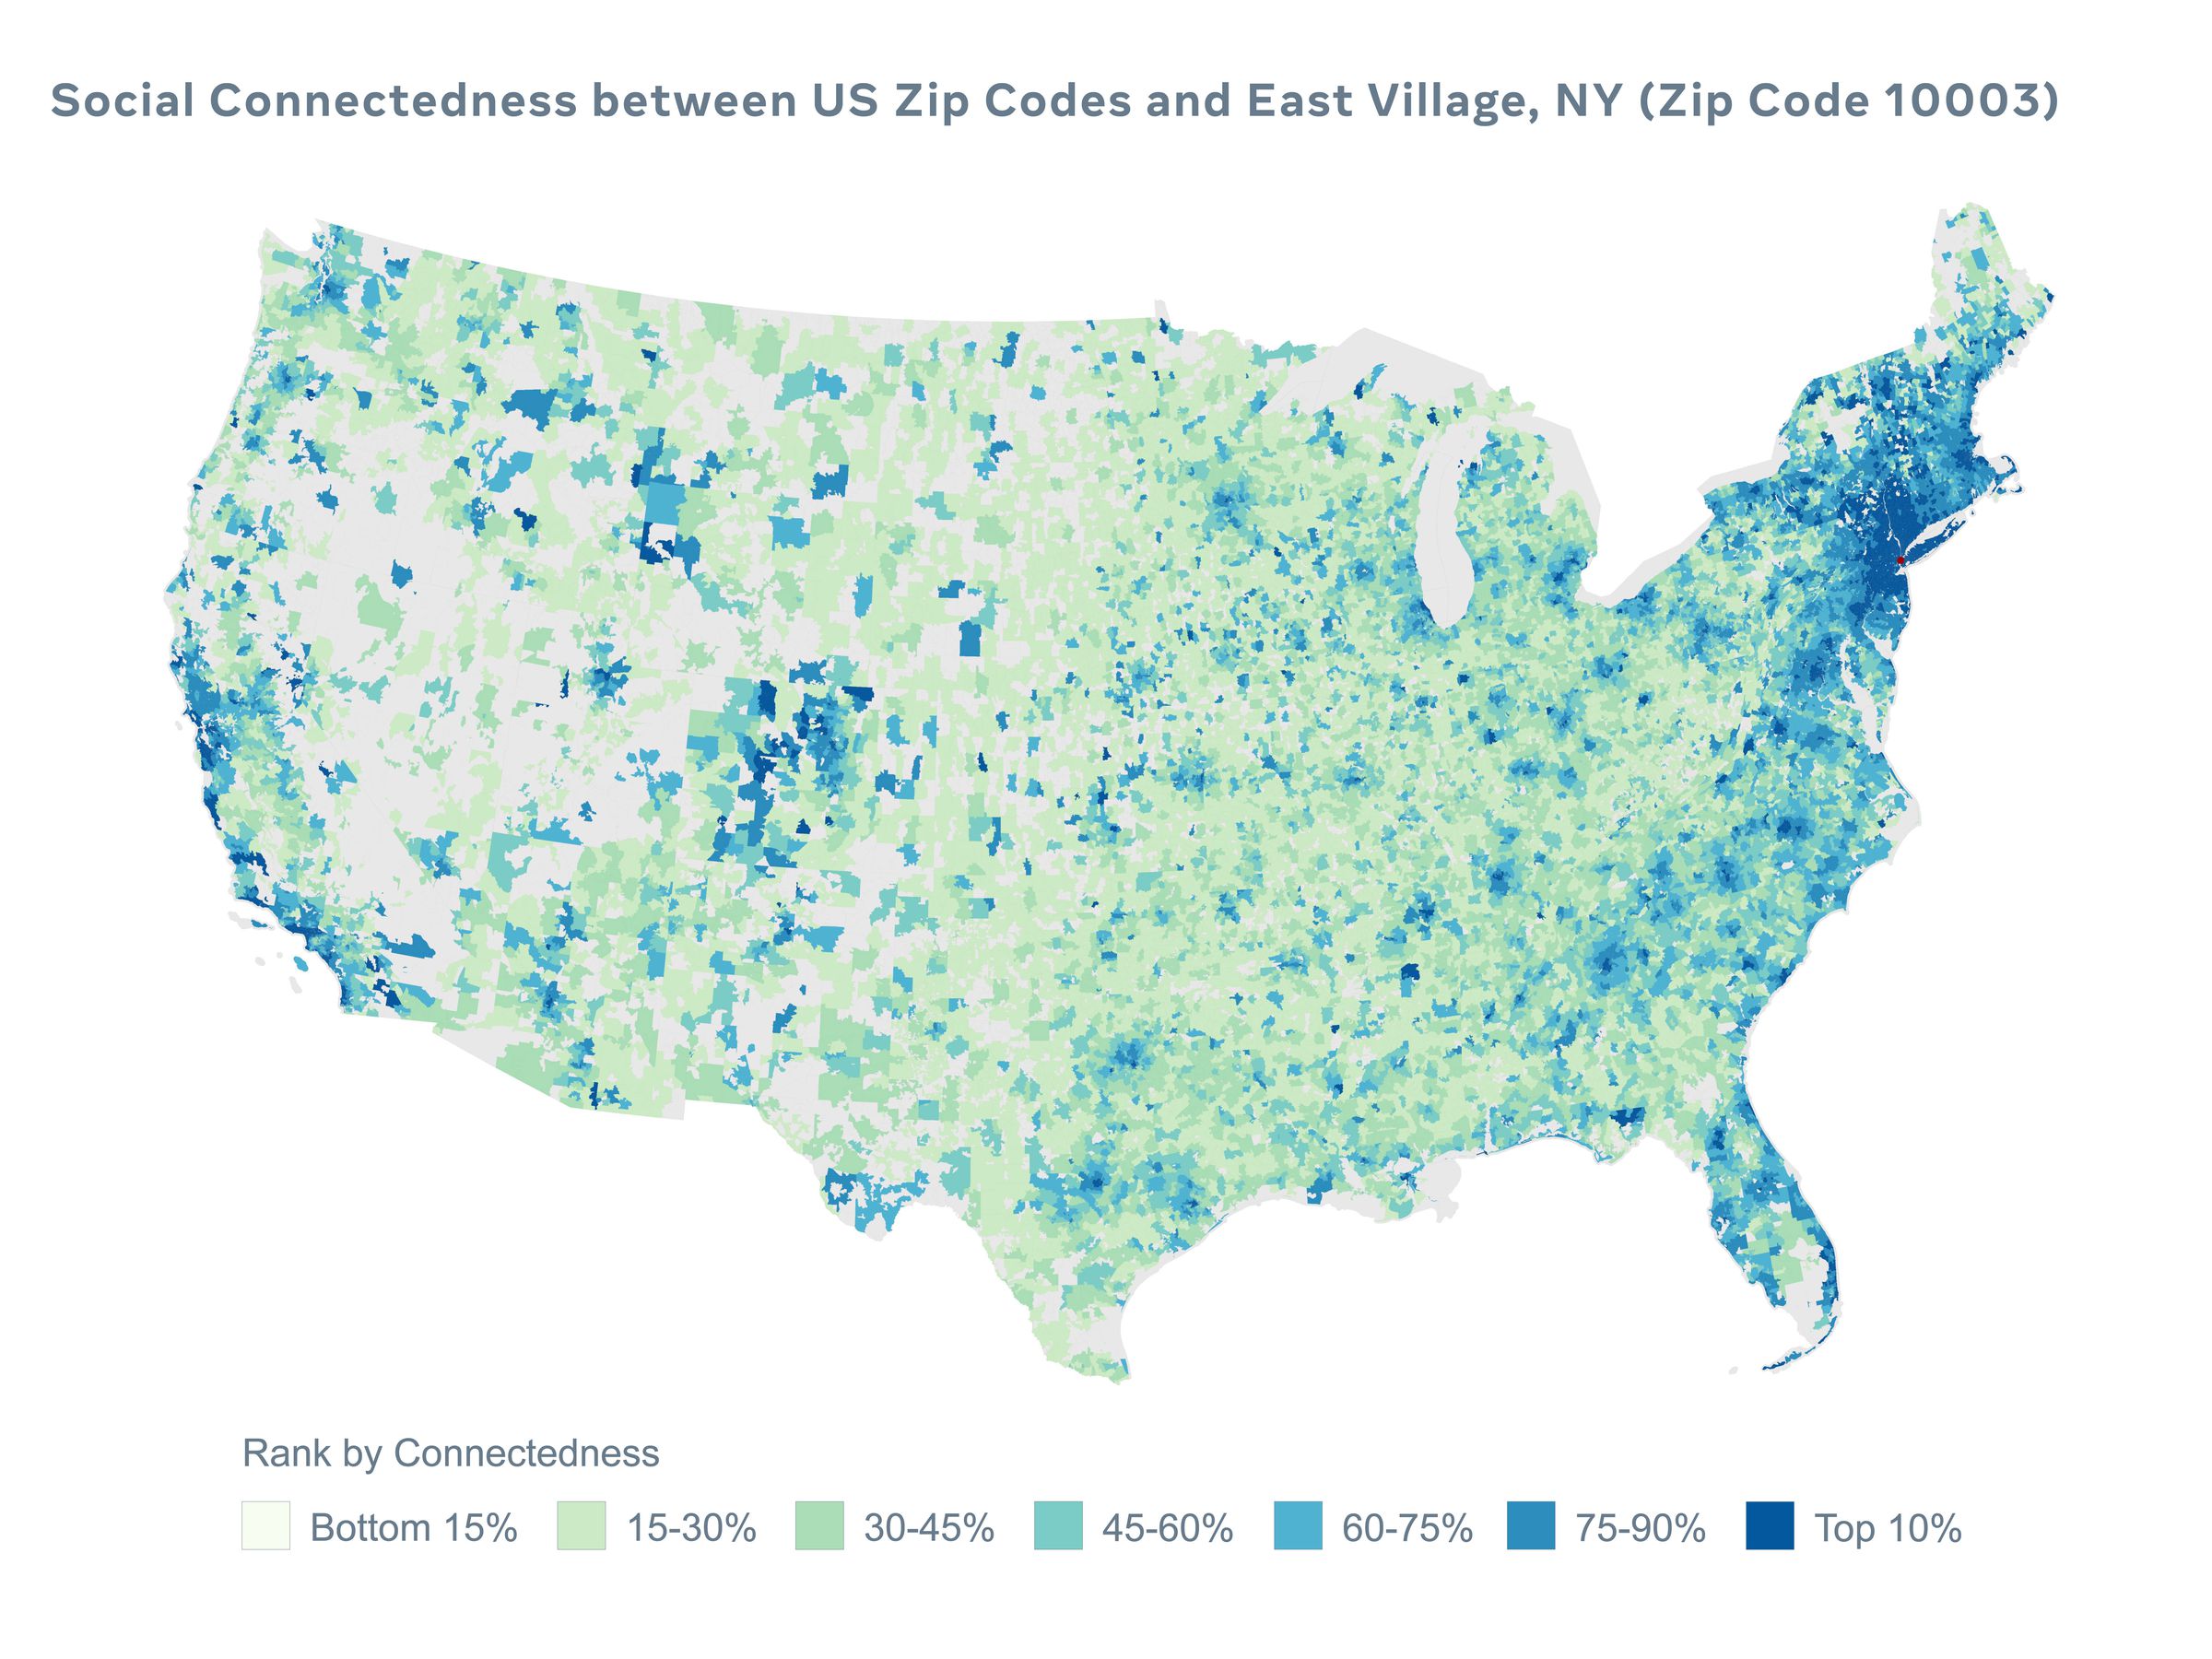 A map of social connectedness between ZIP codes in the United States